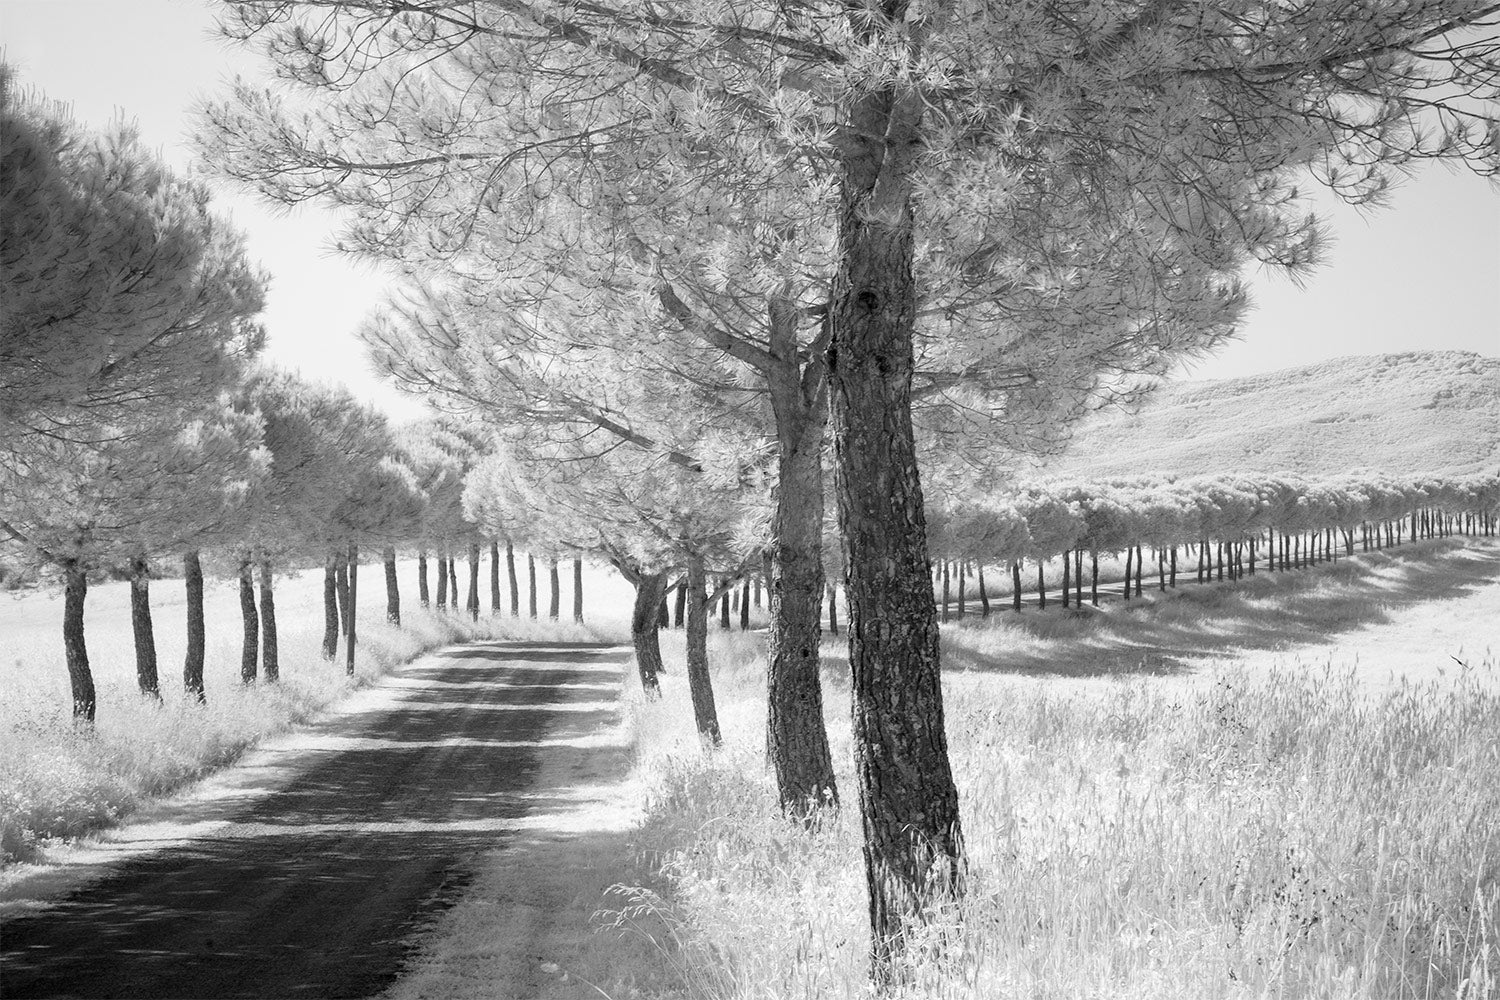 A black and white image of an Avenue of Trees either side of the road through the rolling Italian countryside.